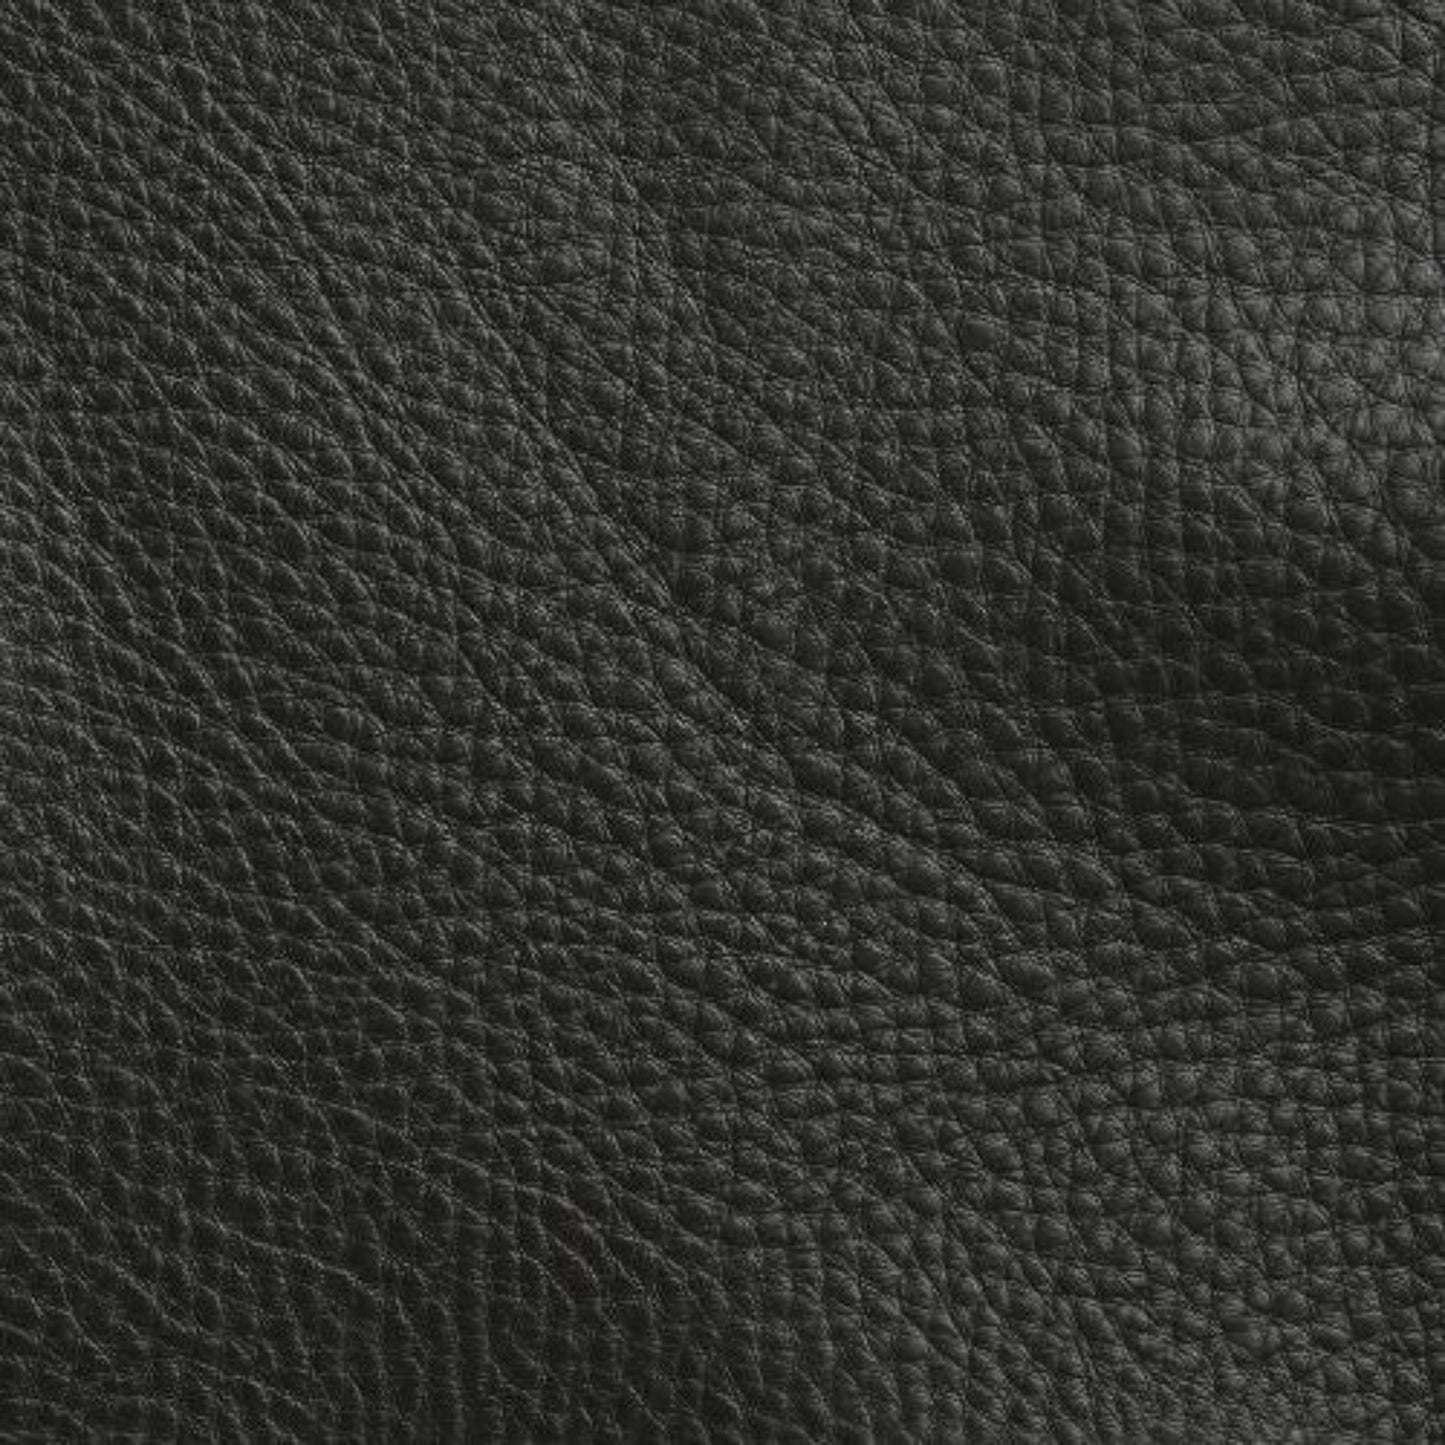 Colby leather ottoman black